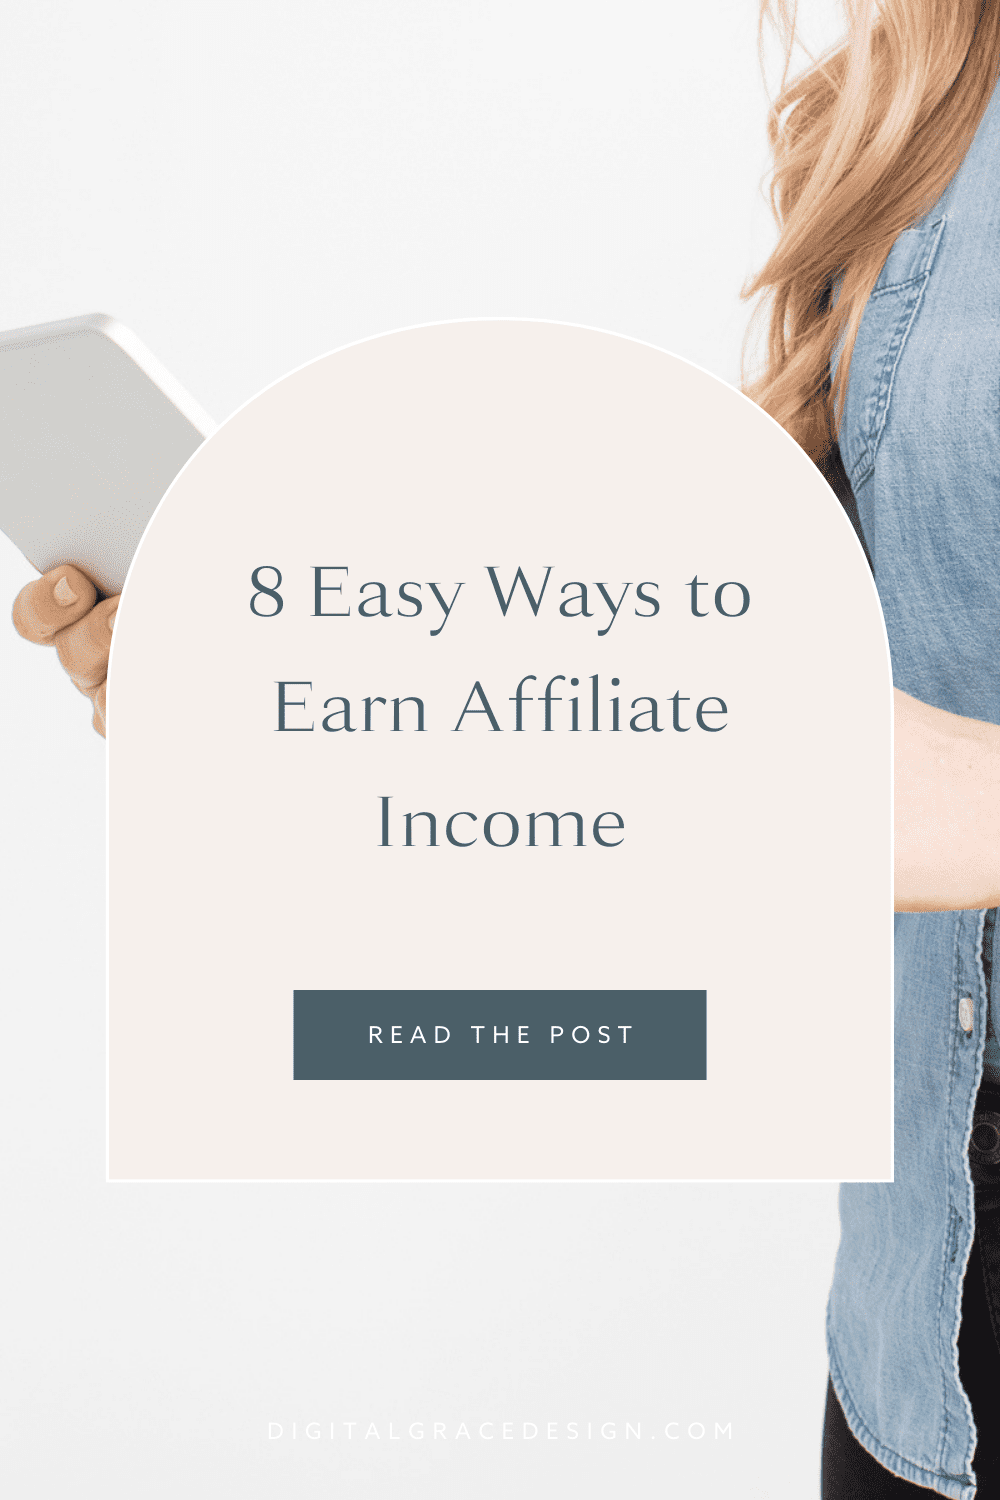 8 Easy Ways to Earn Affiliate Income